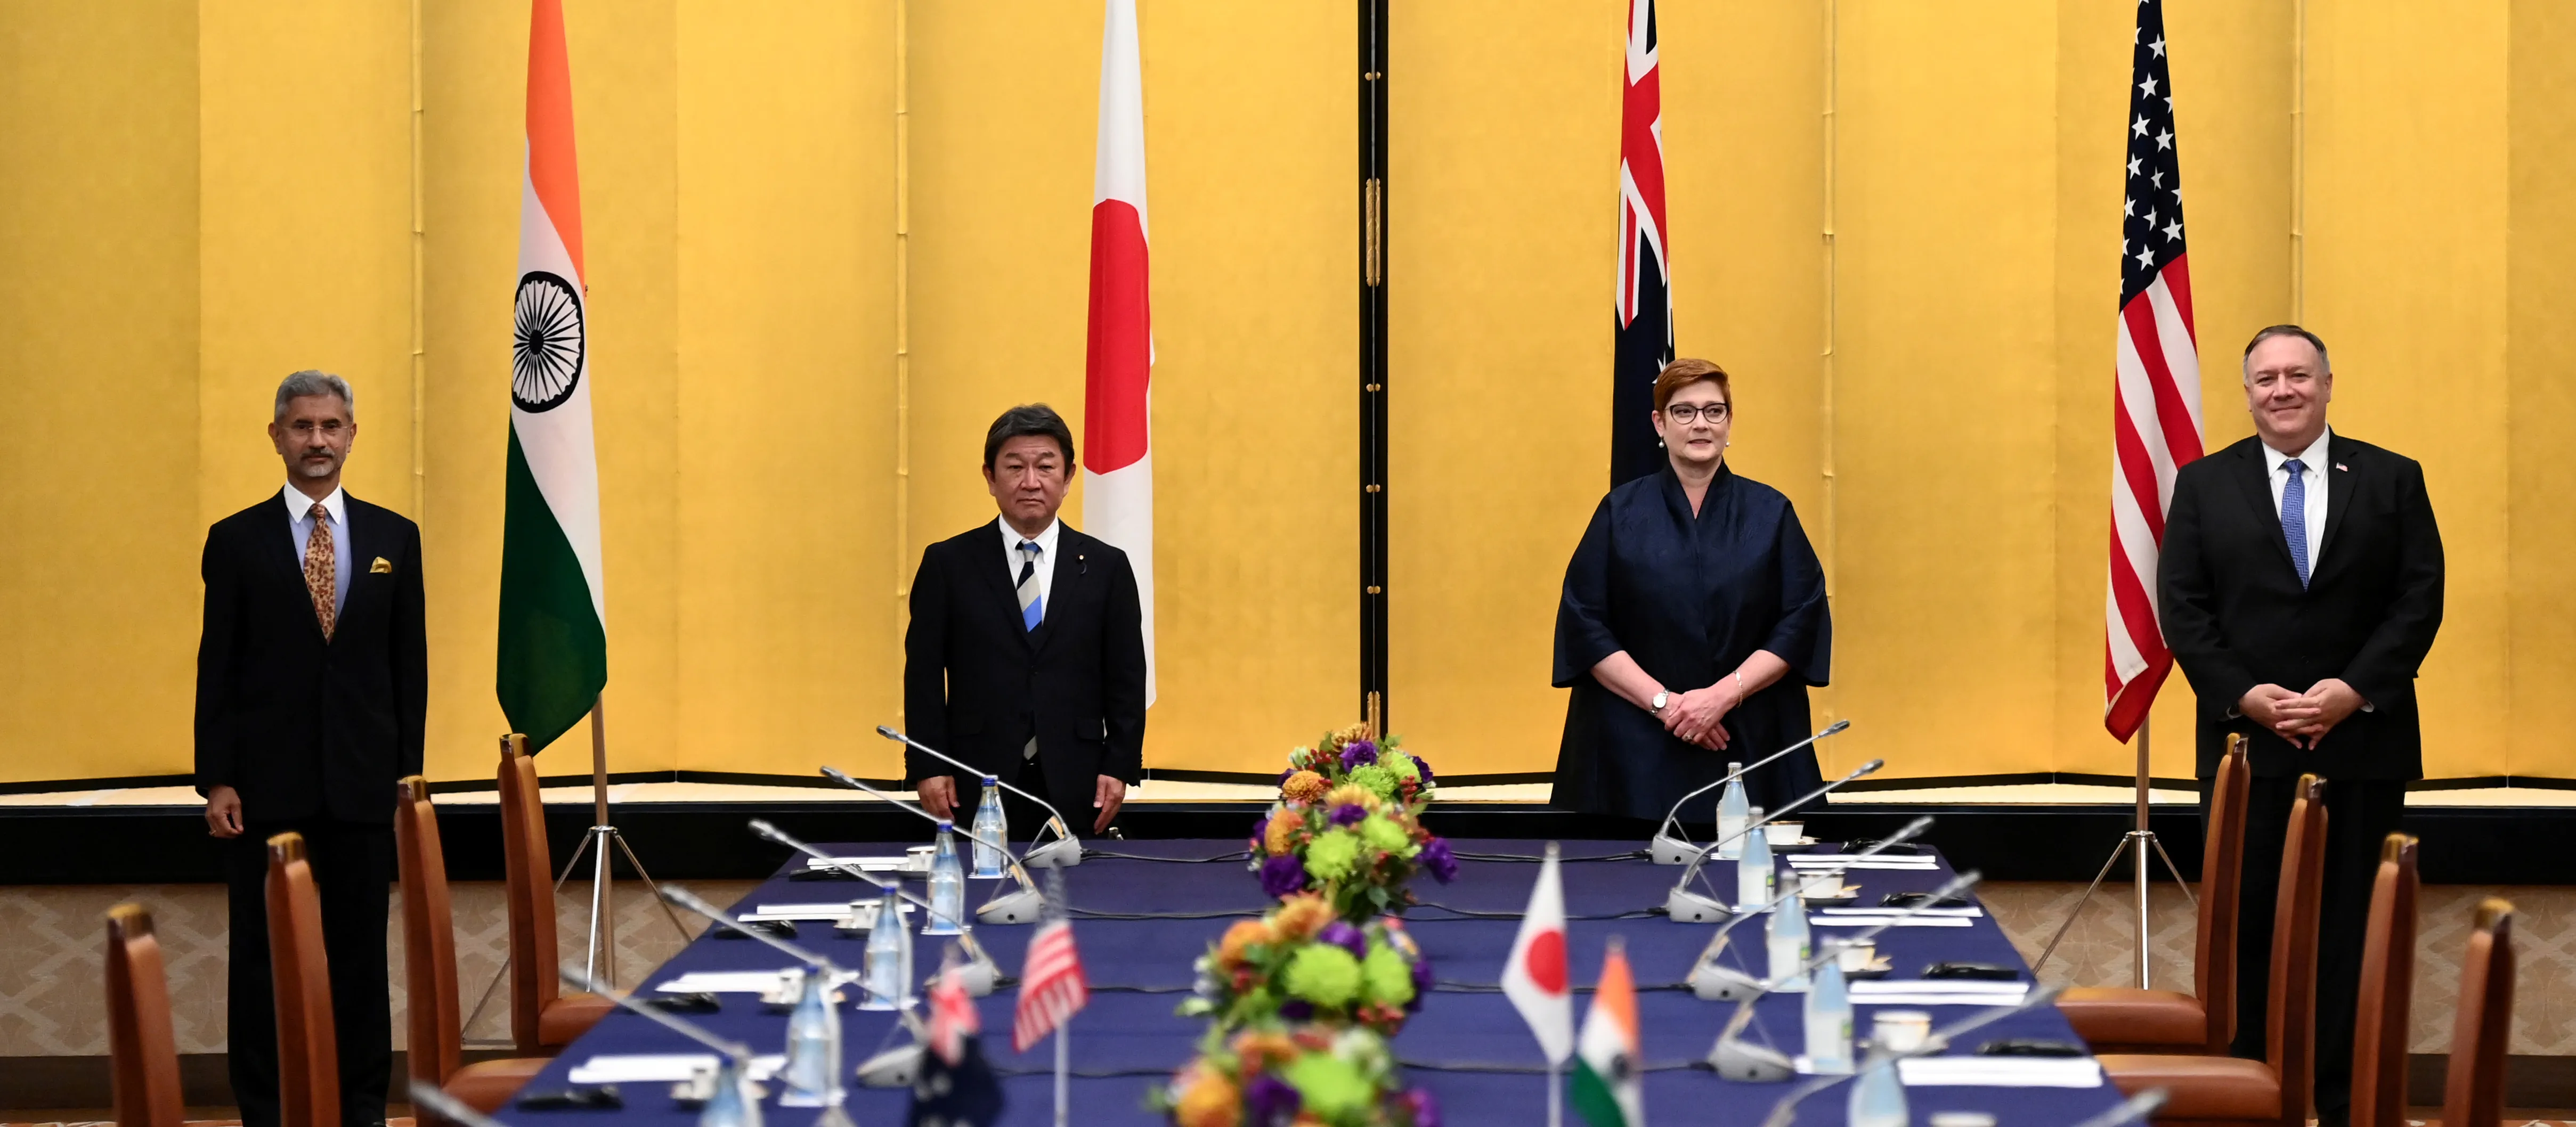 India's Foreign Minister Subrahmanyam Jaishankar, Japan's Foreign Minister Toshimitsu Motegi, Australian Foreign Minister Marise Payne and U.S. Secretary of State Mike Pompeo pose for a picture as they attend a meeting in Tokyo, Japan October 6, 2020.  Charly Triballeau/Pool via REUTERS